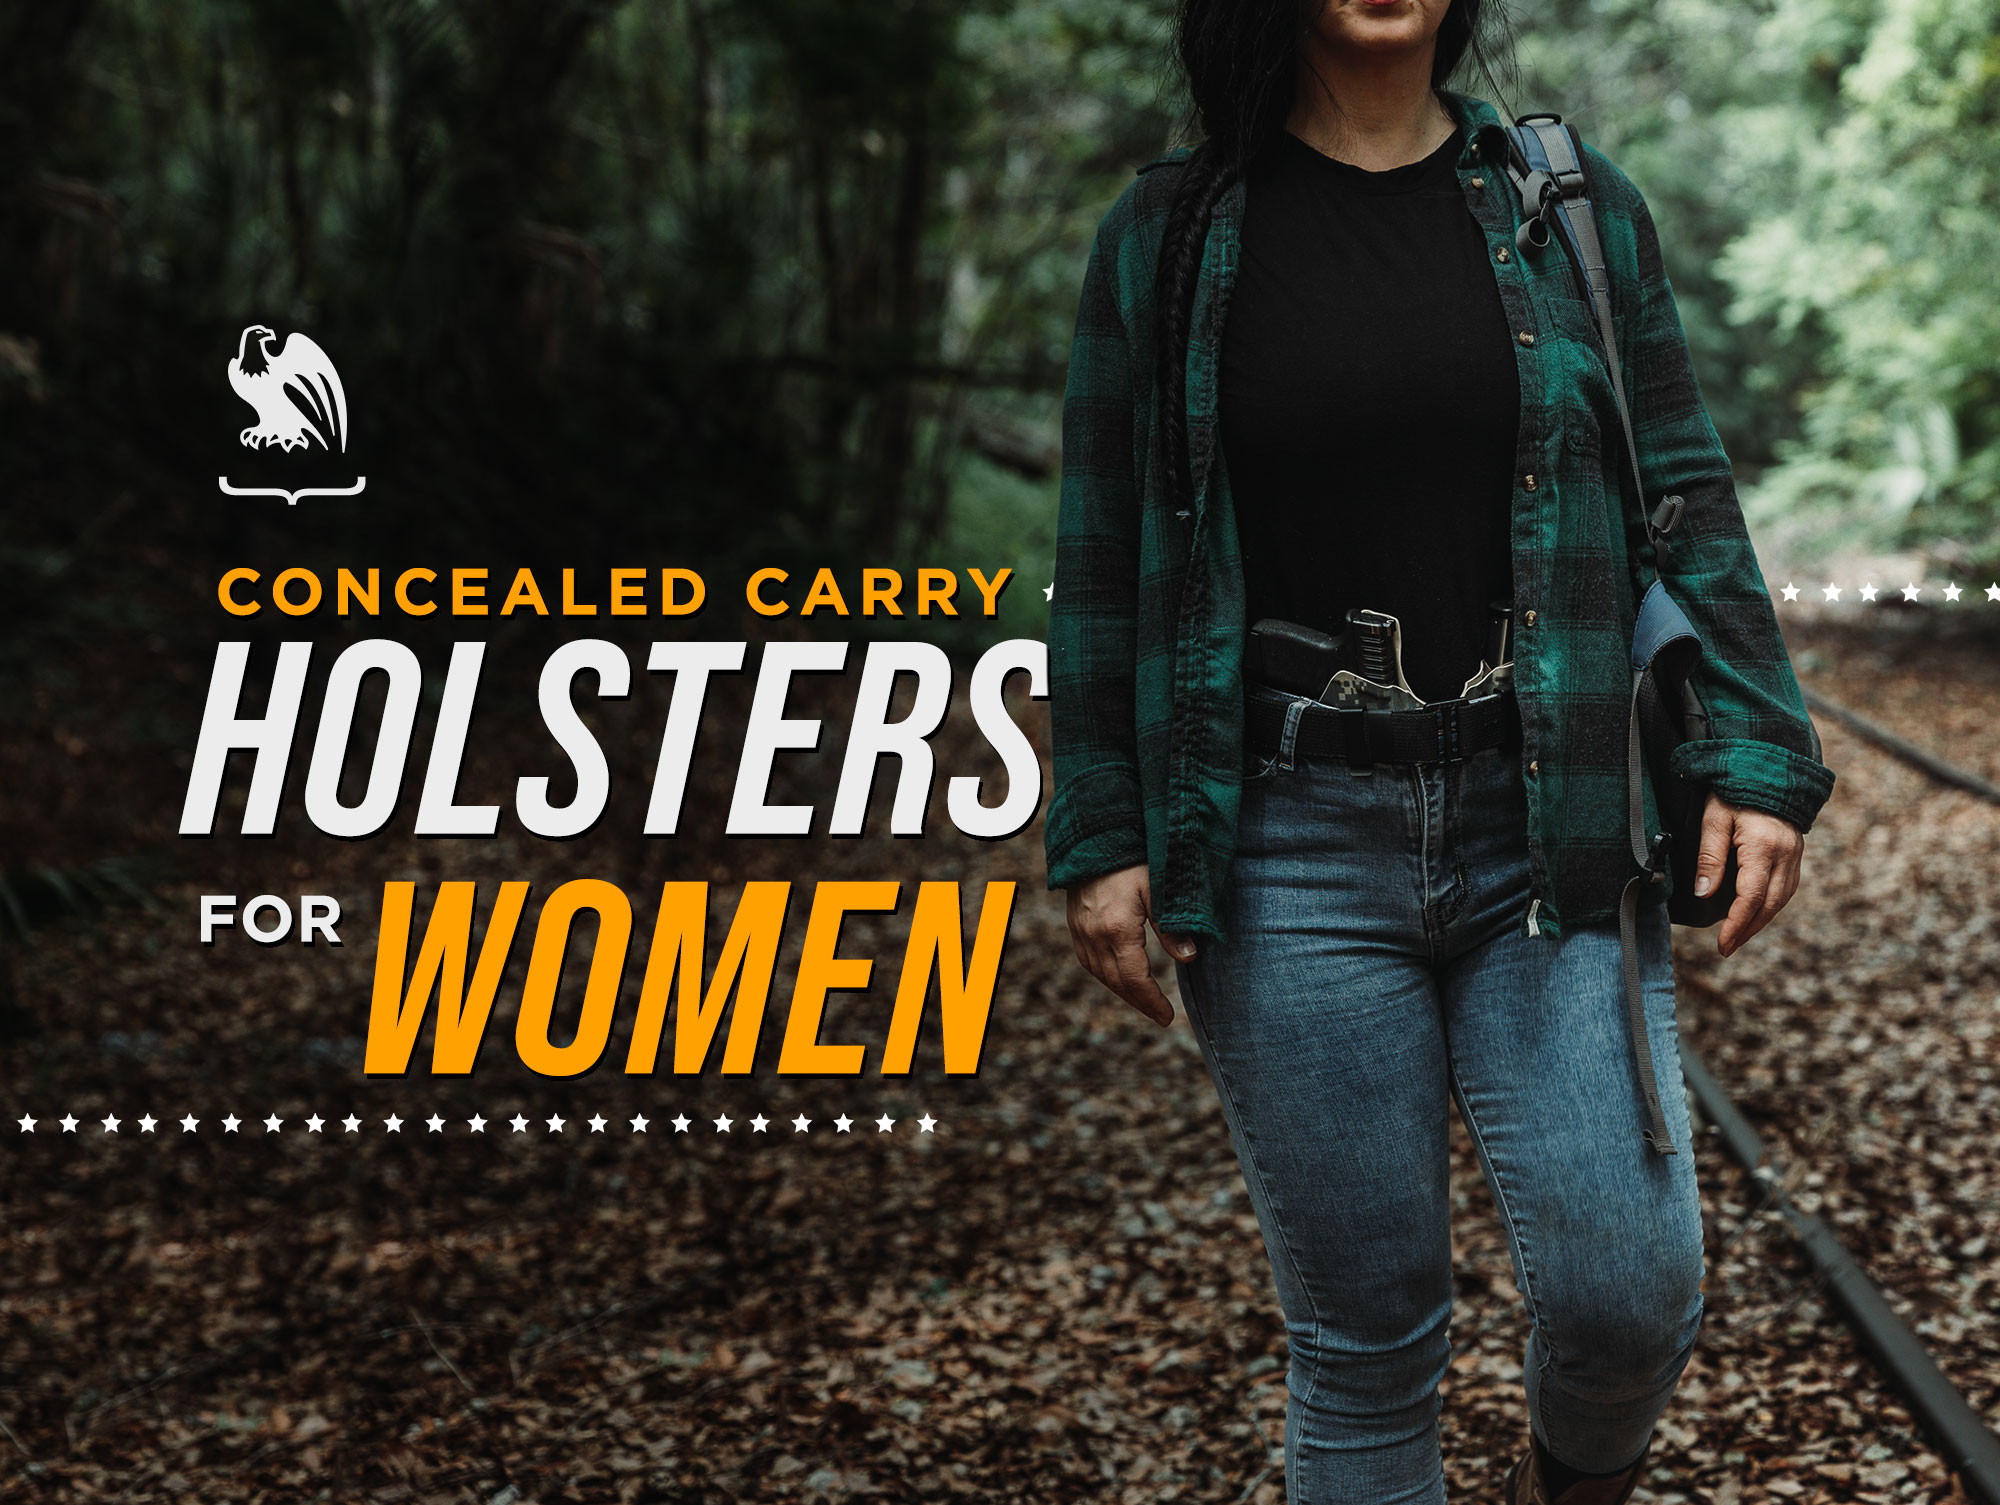 Women's Concealed Carry Holster Options » Concealed Carry Inc